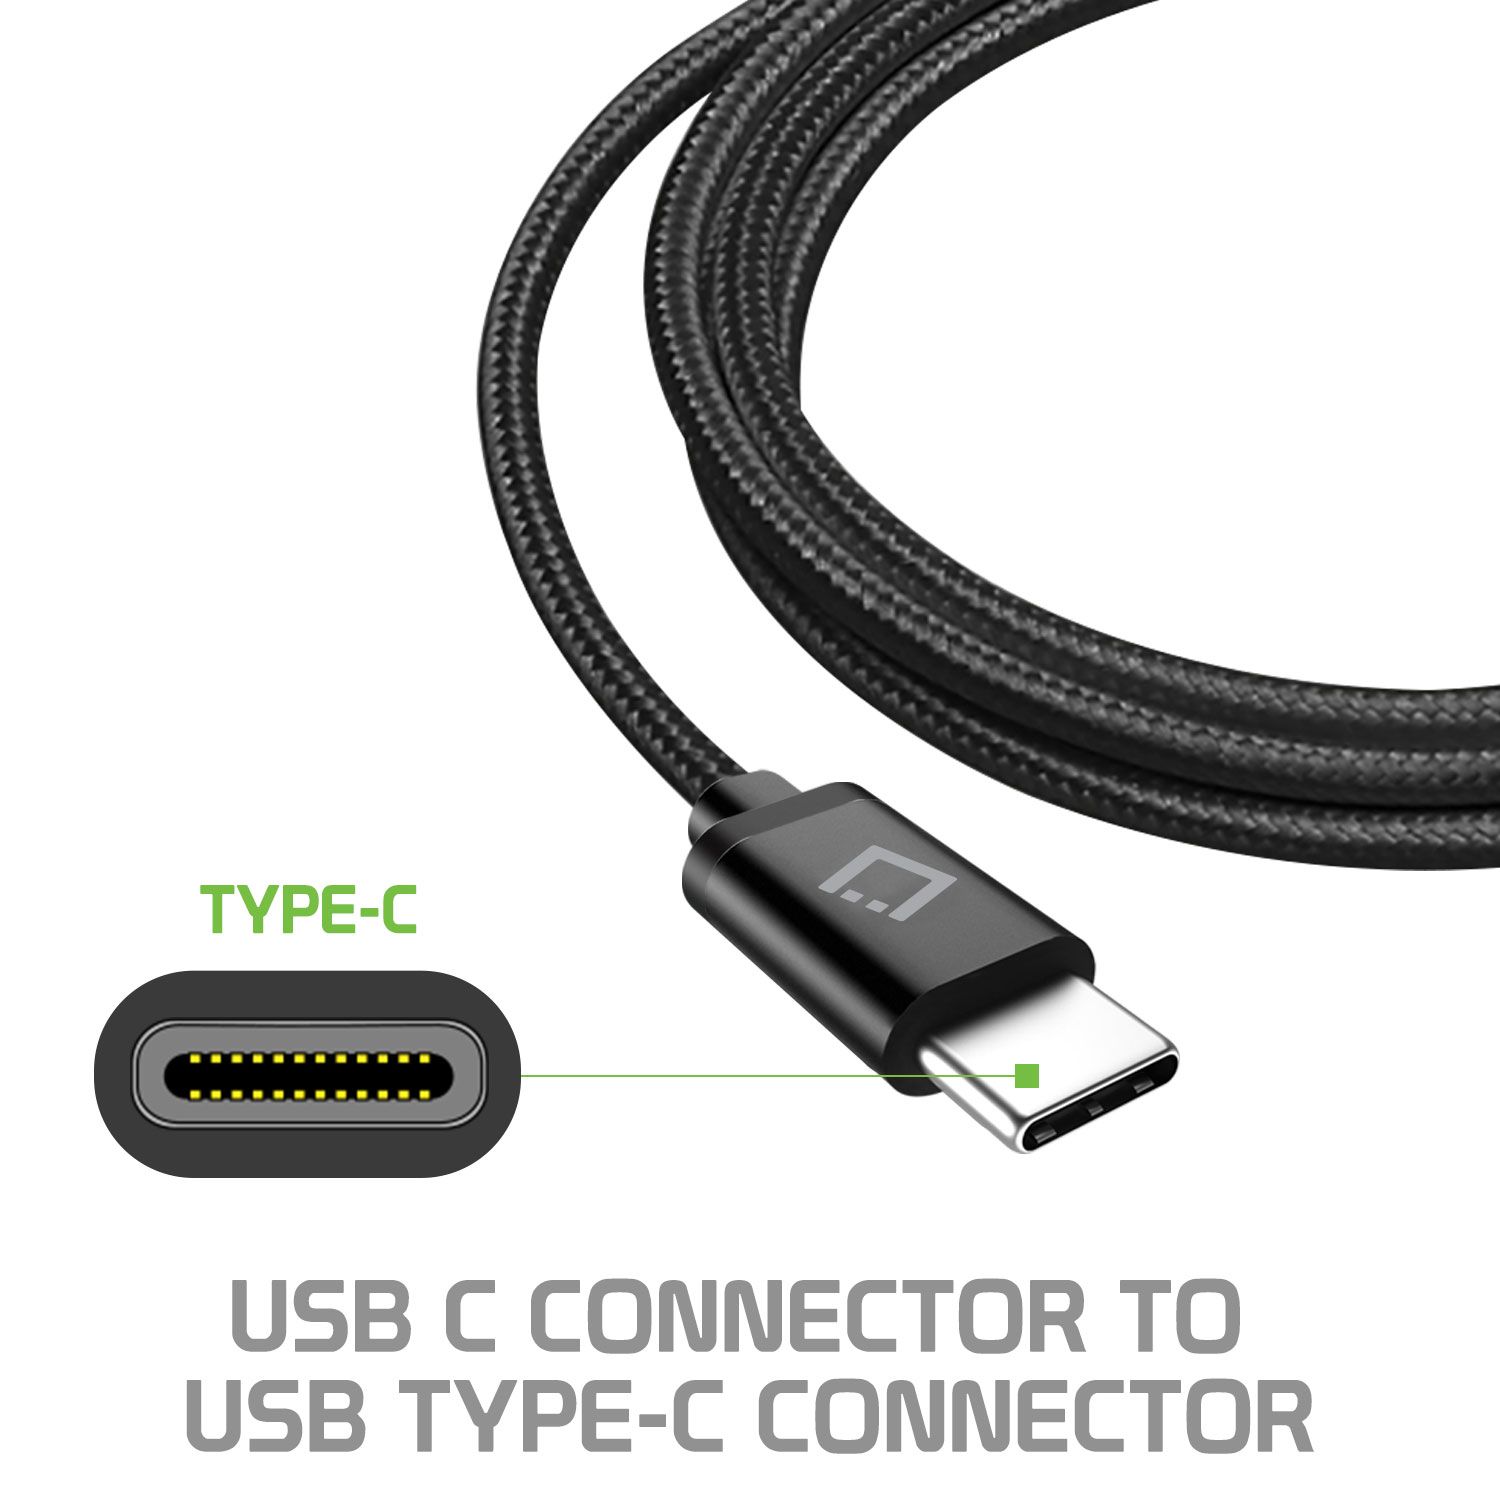 Cellet USB-C to USB-C Cable Compatible with Samsung Galaxy Z Flip, Heavy Duty Braided USB Type-C to Type-C Cable (6 feet/1.8 meters) and Atom Wipe - image 2 of 9